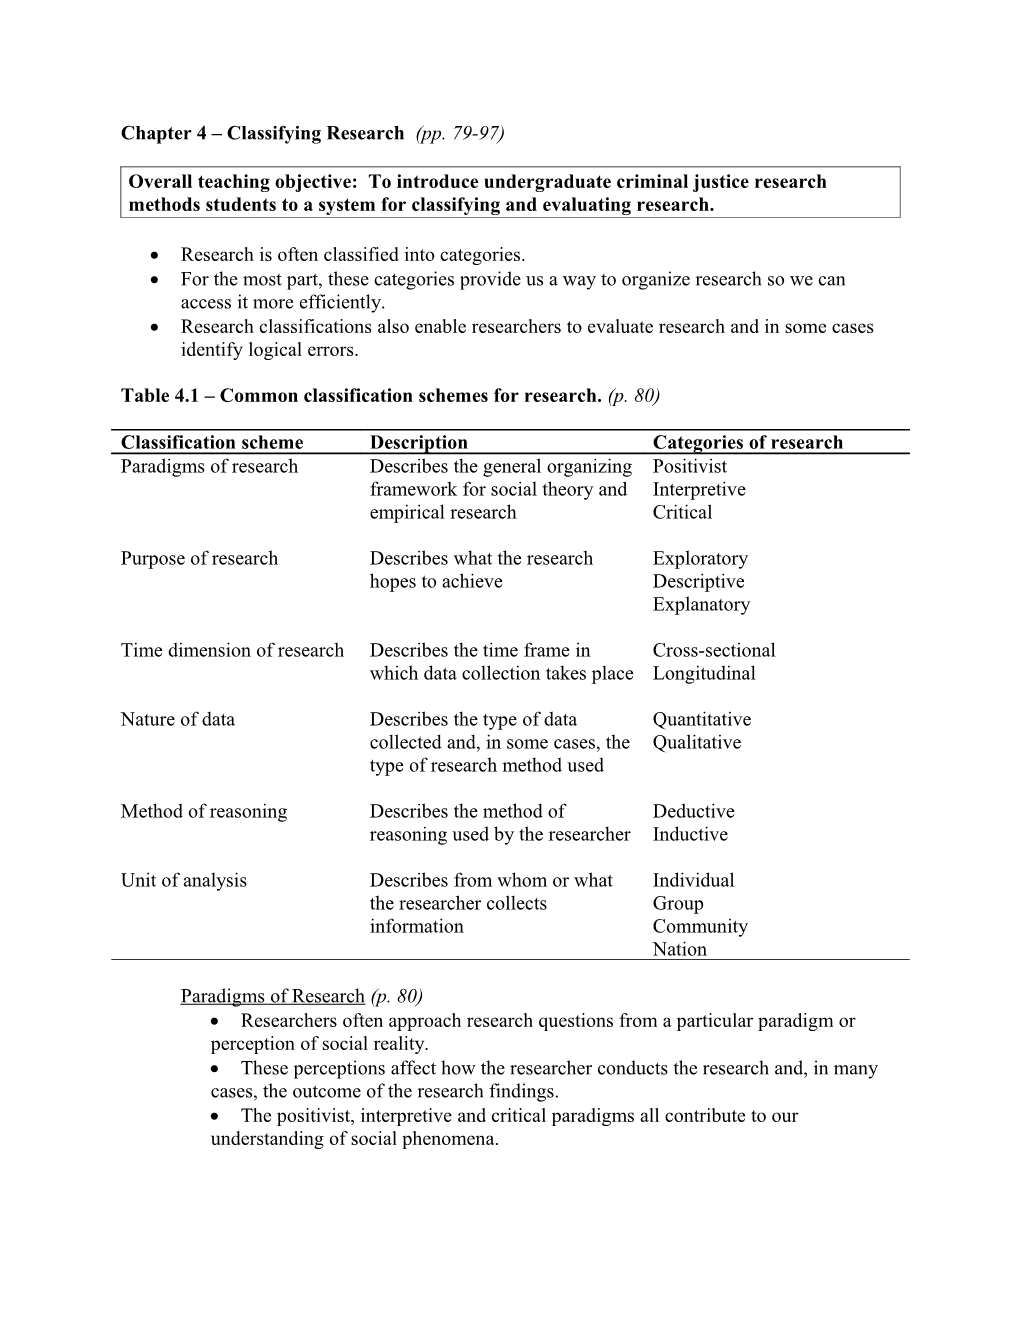 Chapter 4 Classifying Research (Pp. 79-97)